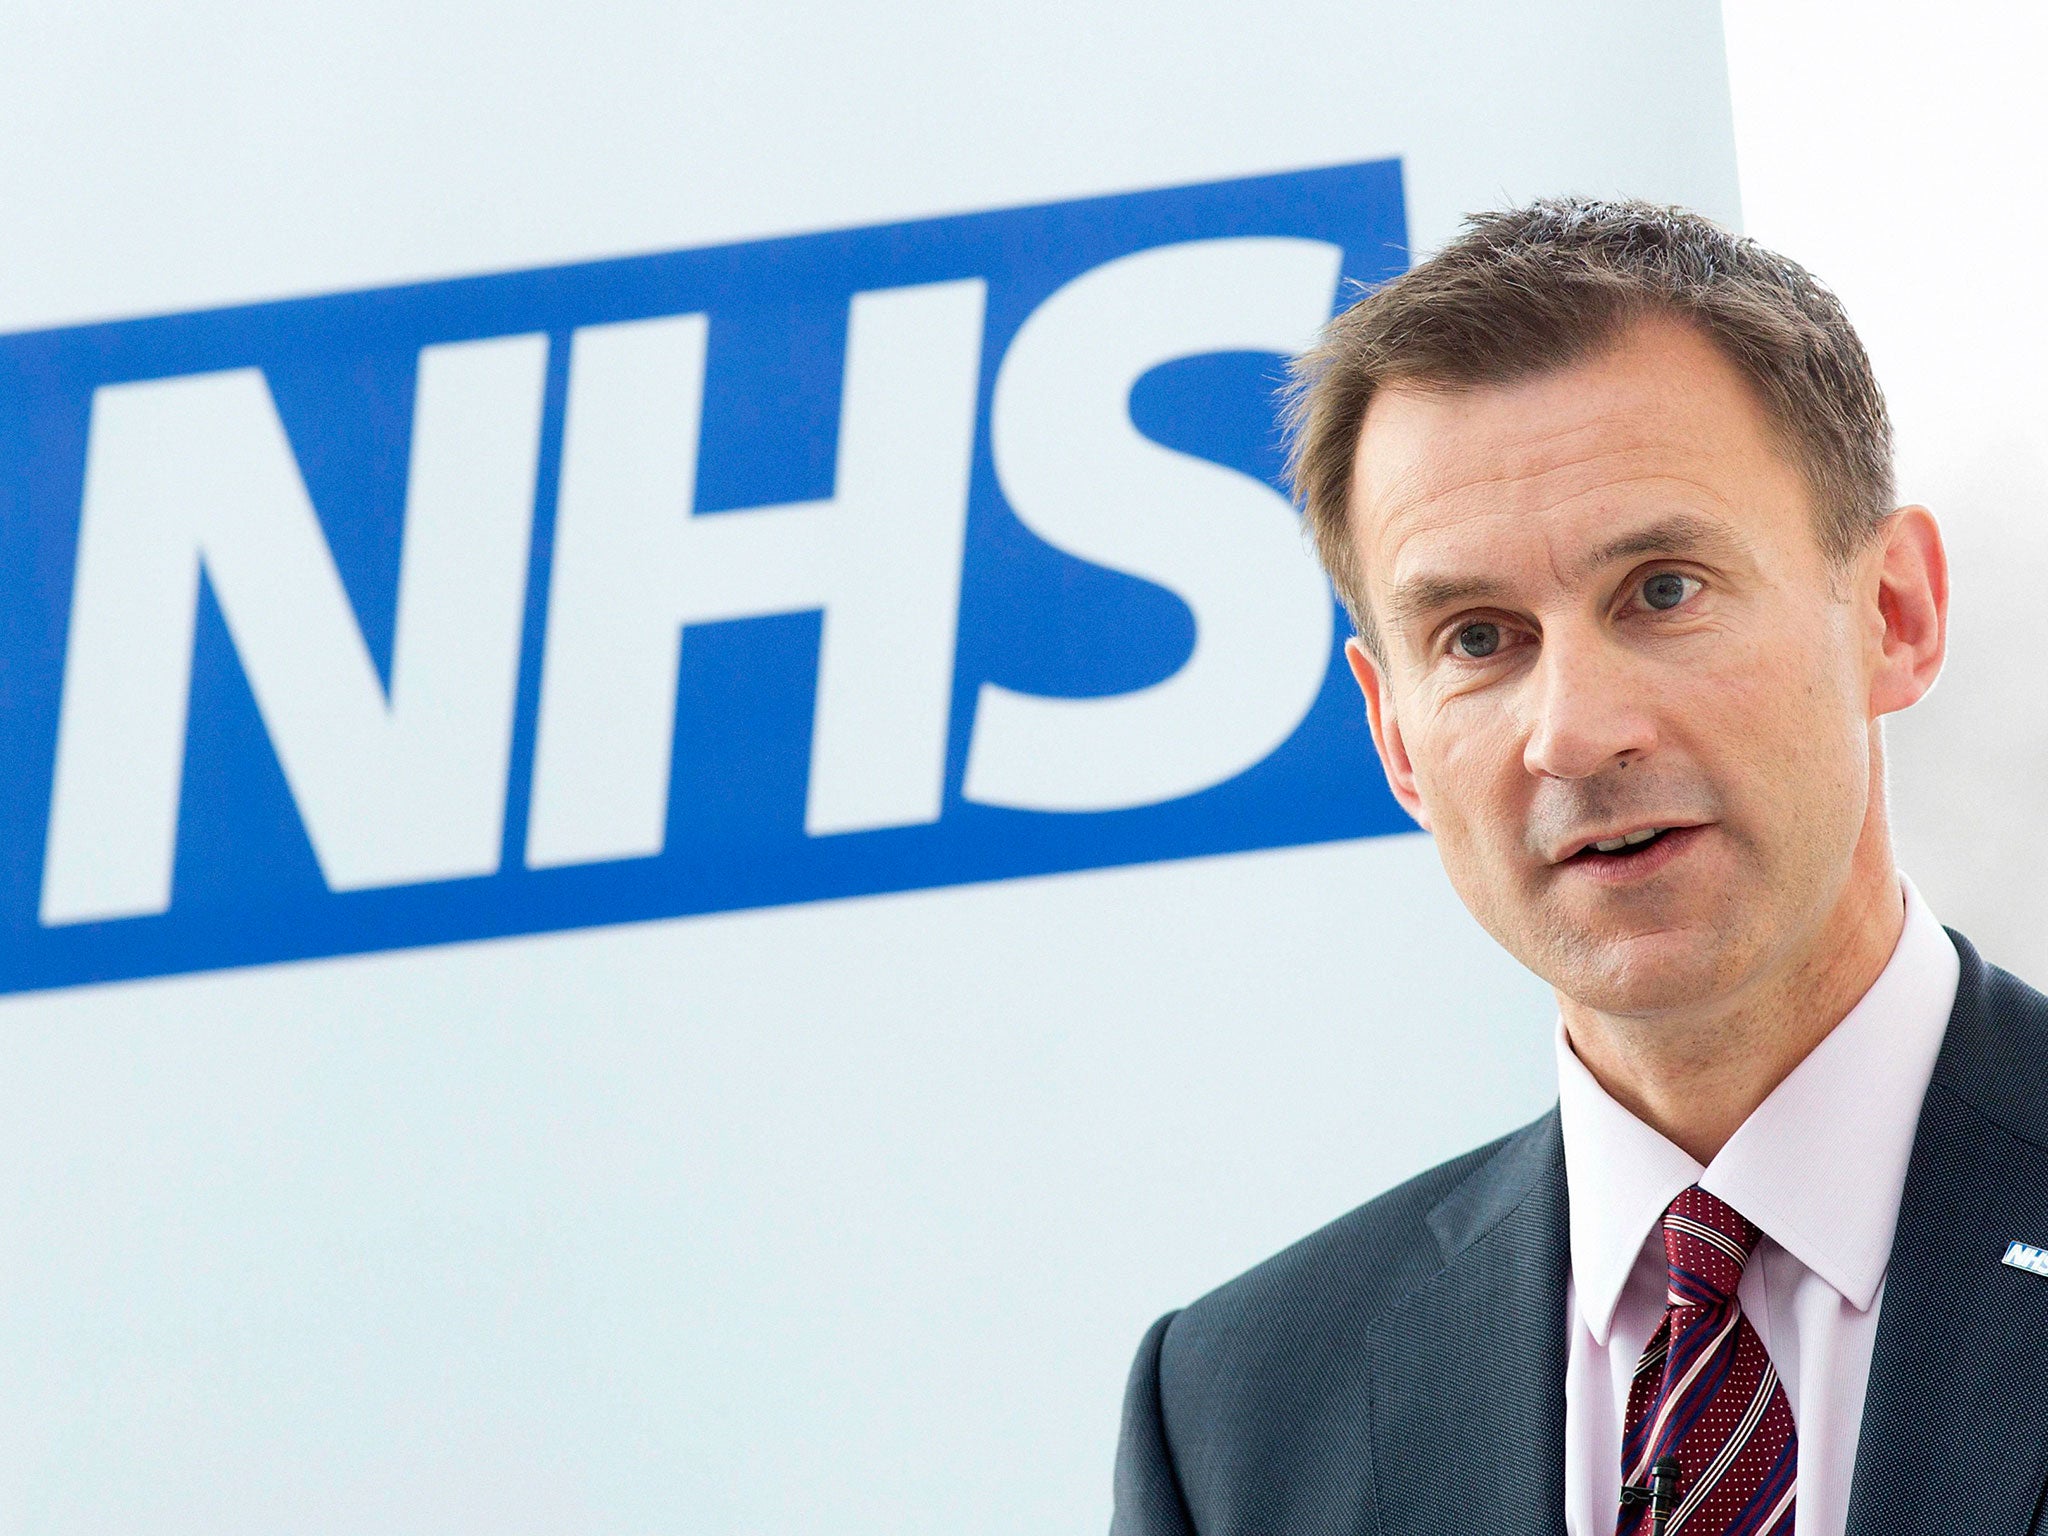 Jeremy Hunt’s justification for reforming NHS working practices has been called into question, after it was revealed that less than one per cent of consultants actually use a contract loophole to 'opt-out' of weekend work